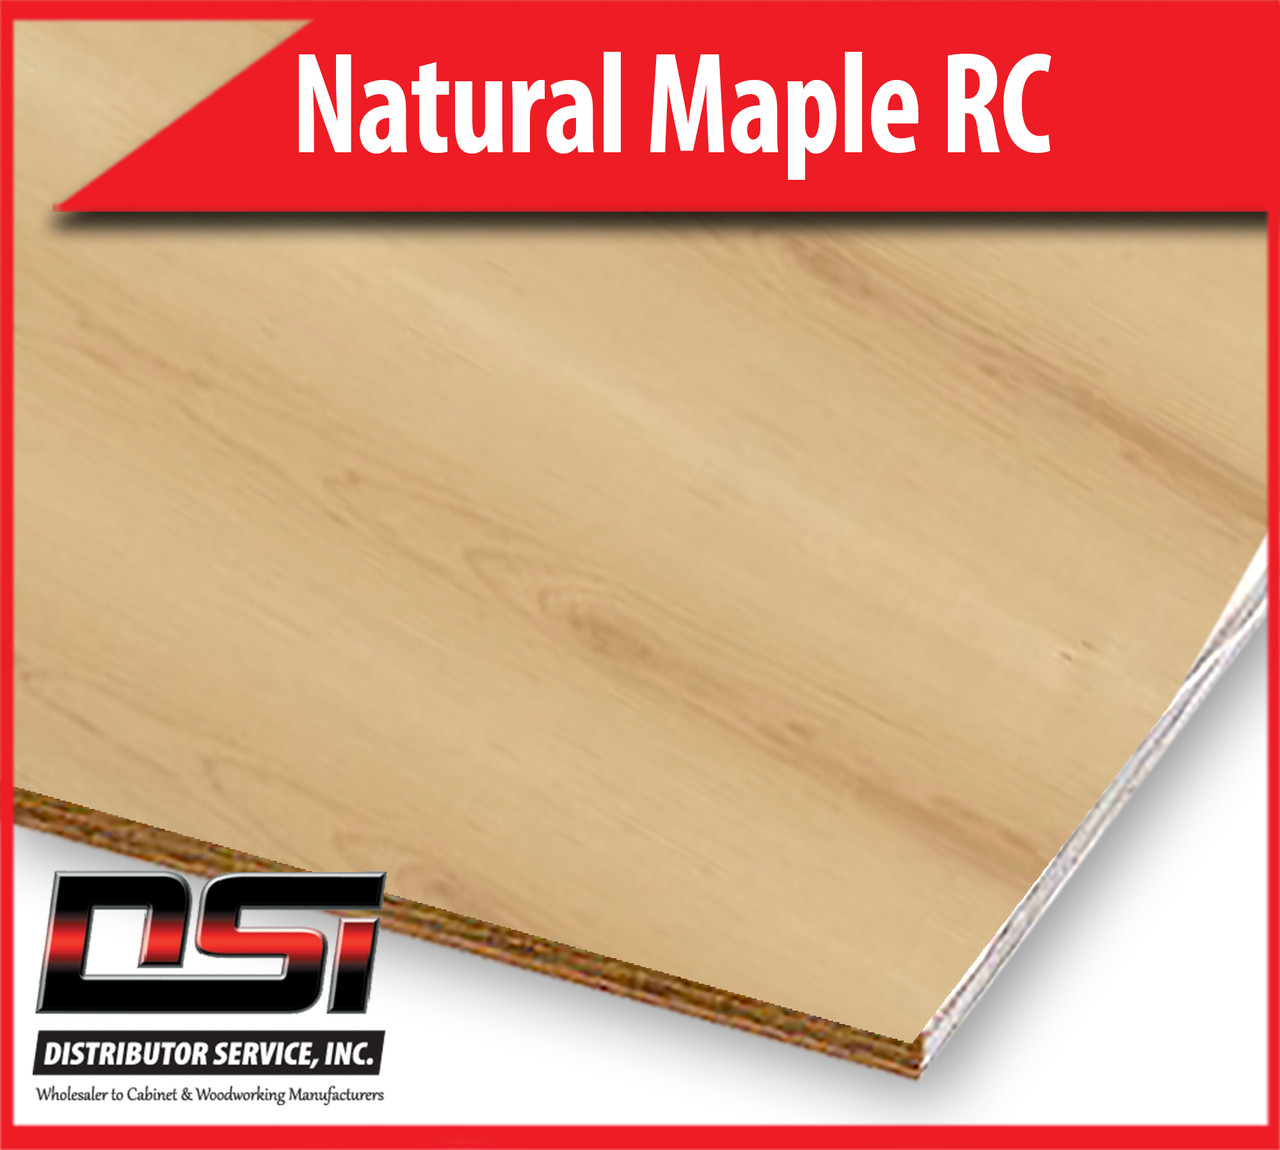 Natural Maple Plywood Rotary Cut MDF A2 3/4" x 4x8